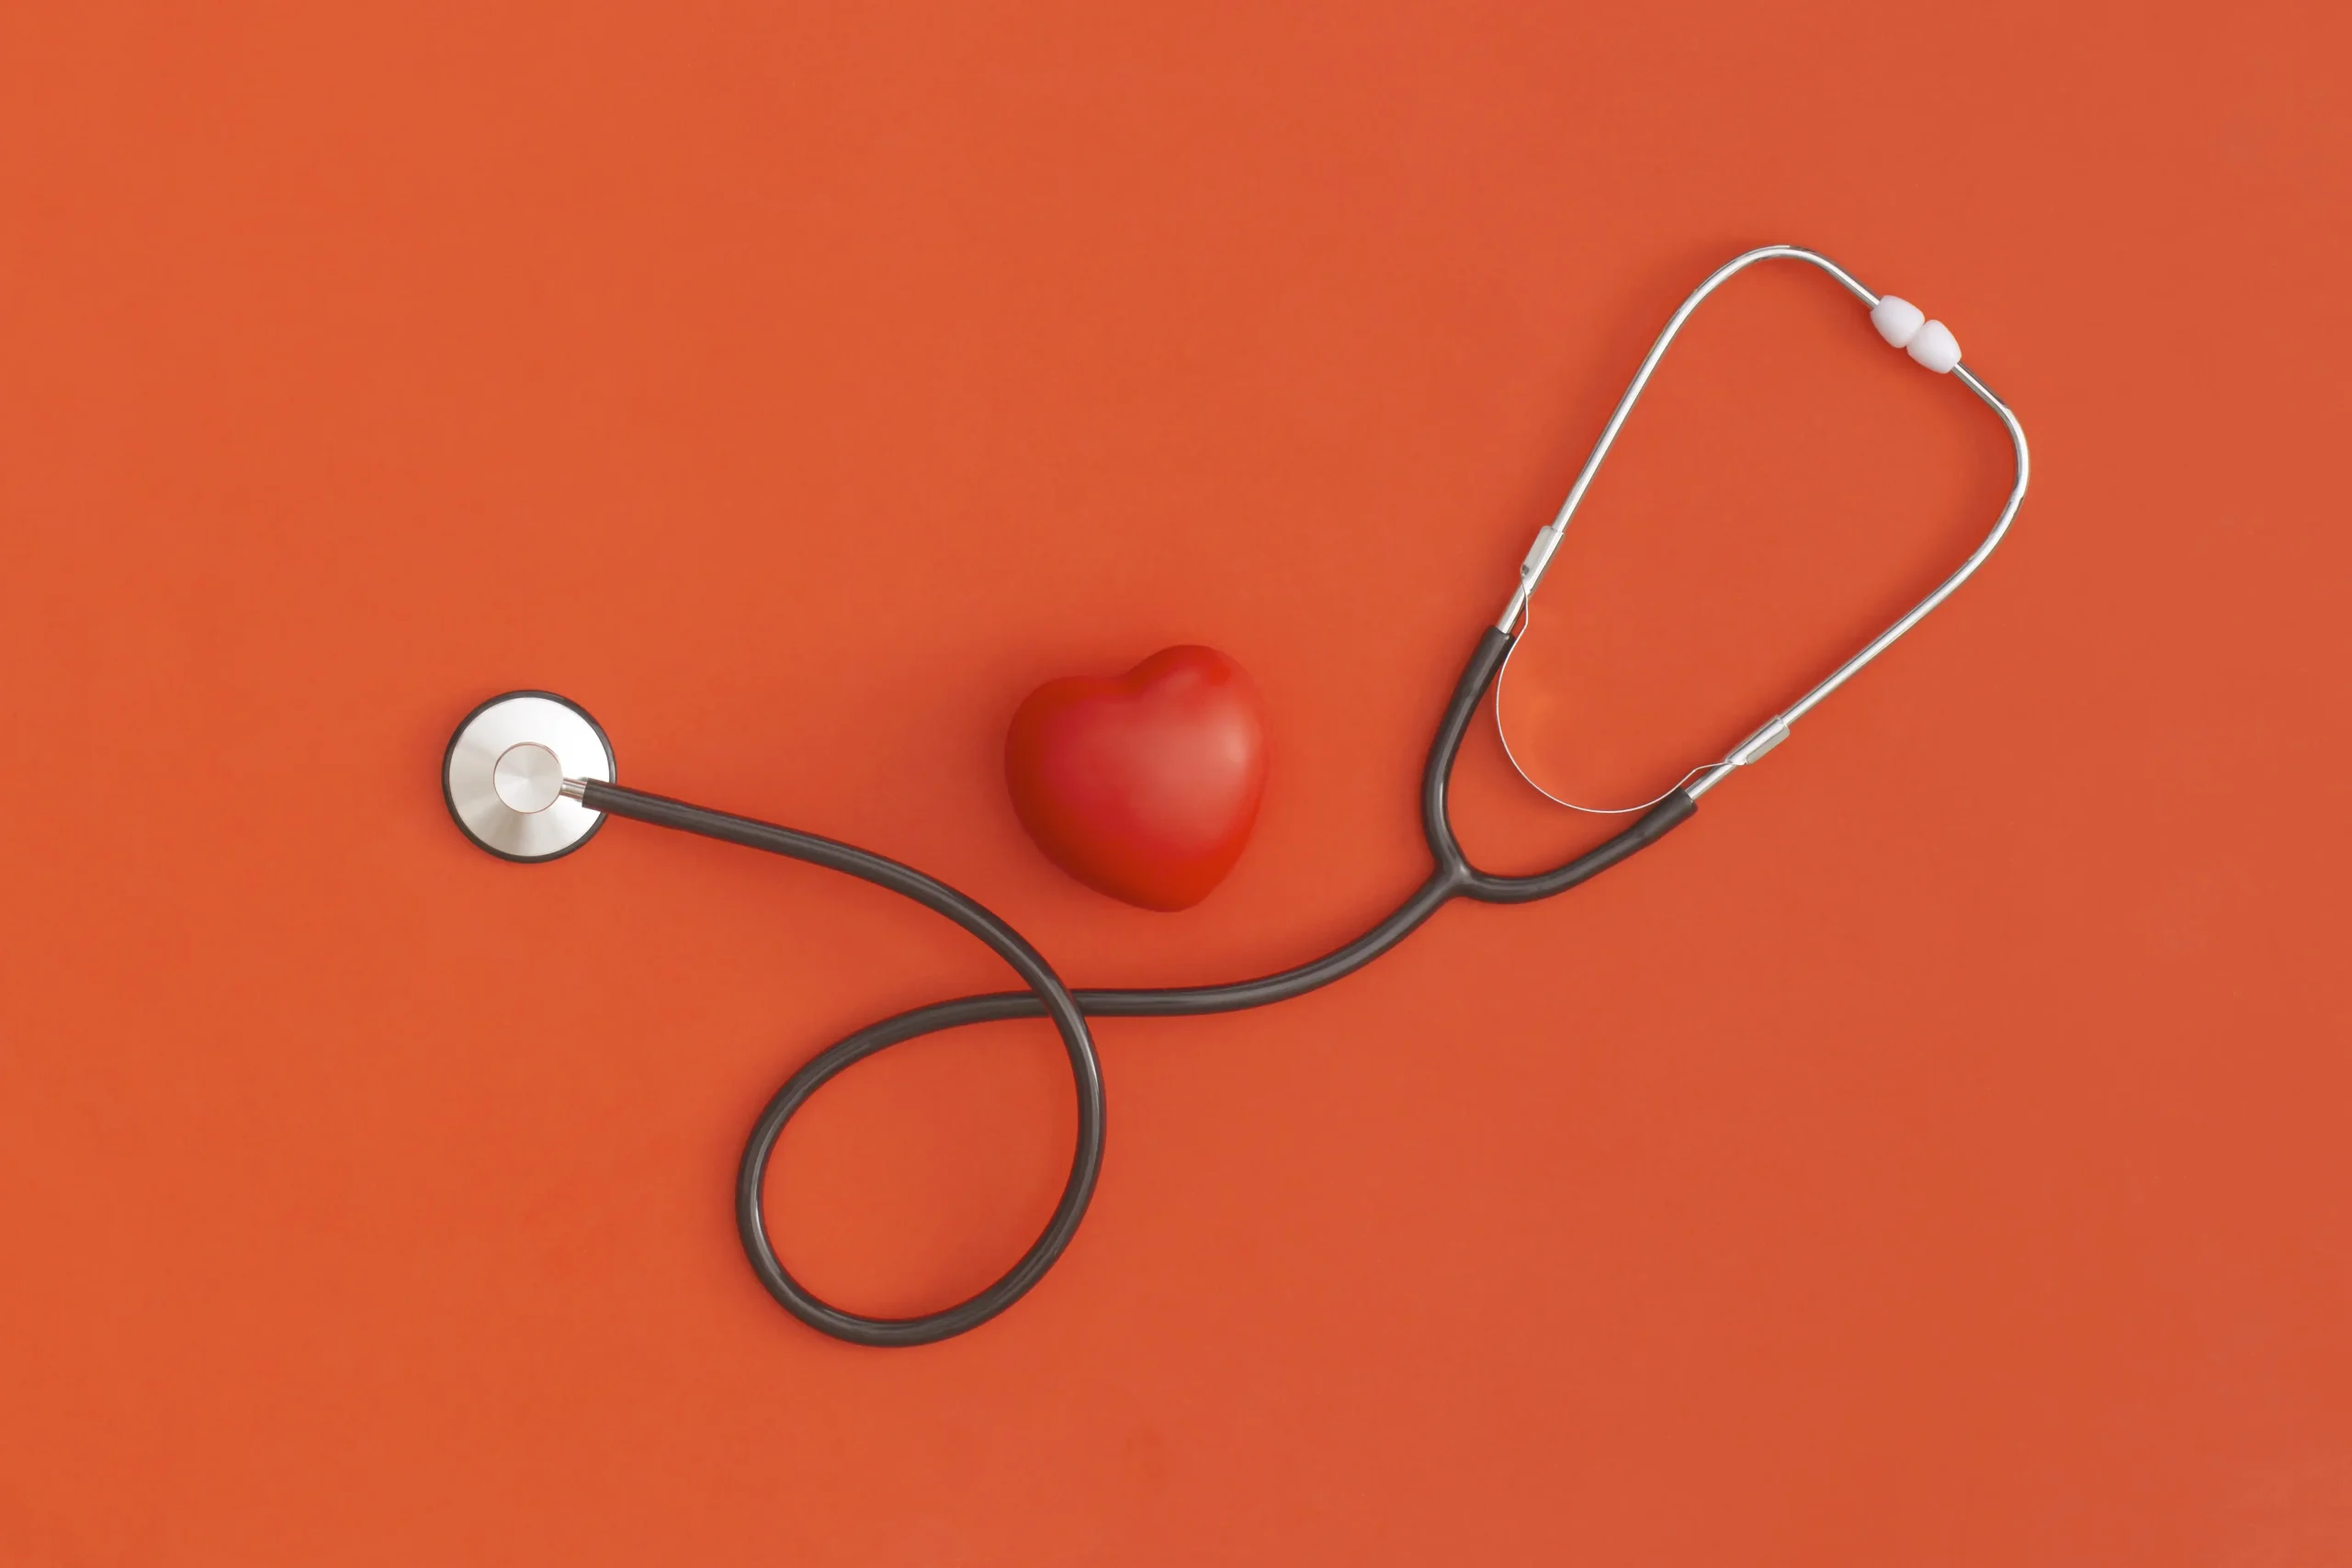 Stethoscope and small red heart against orange backdrop